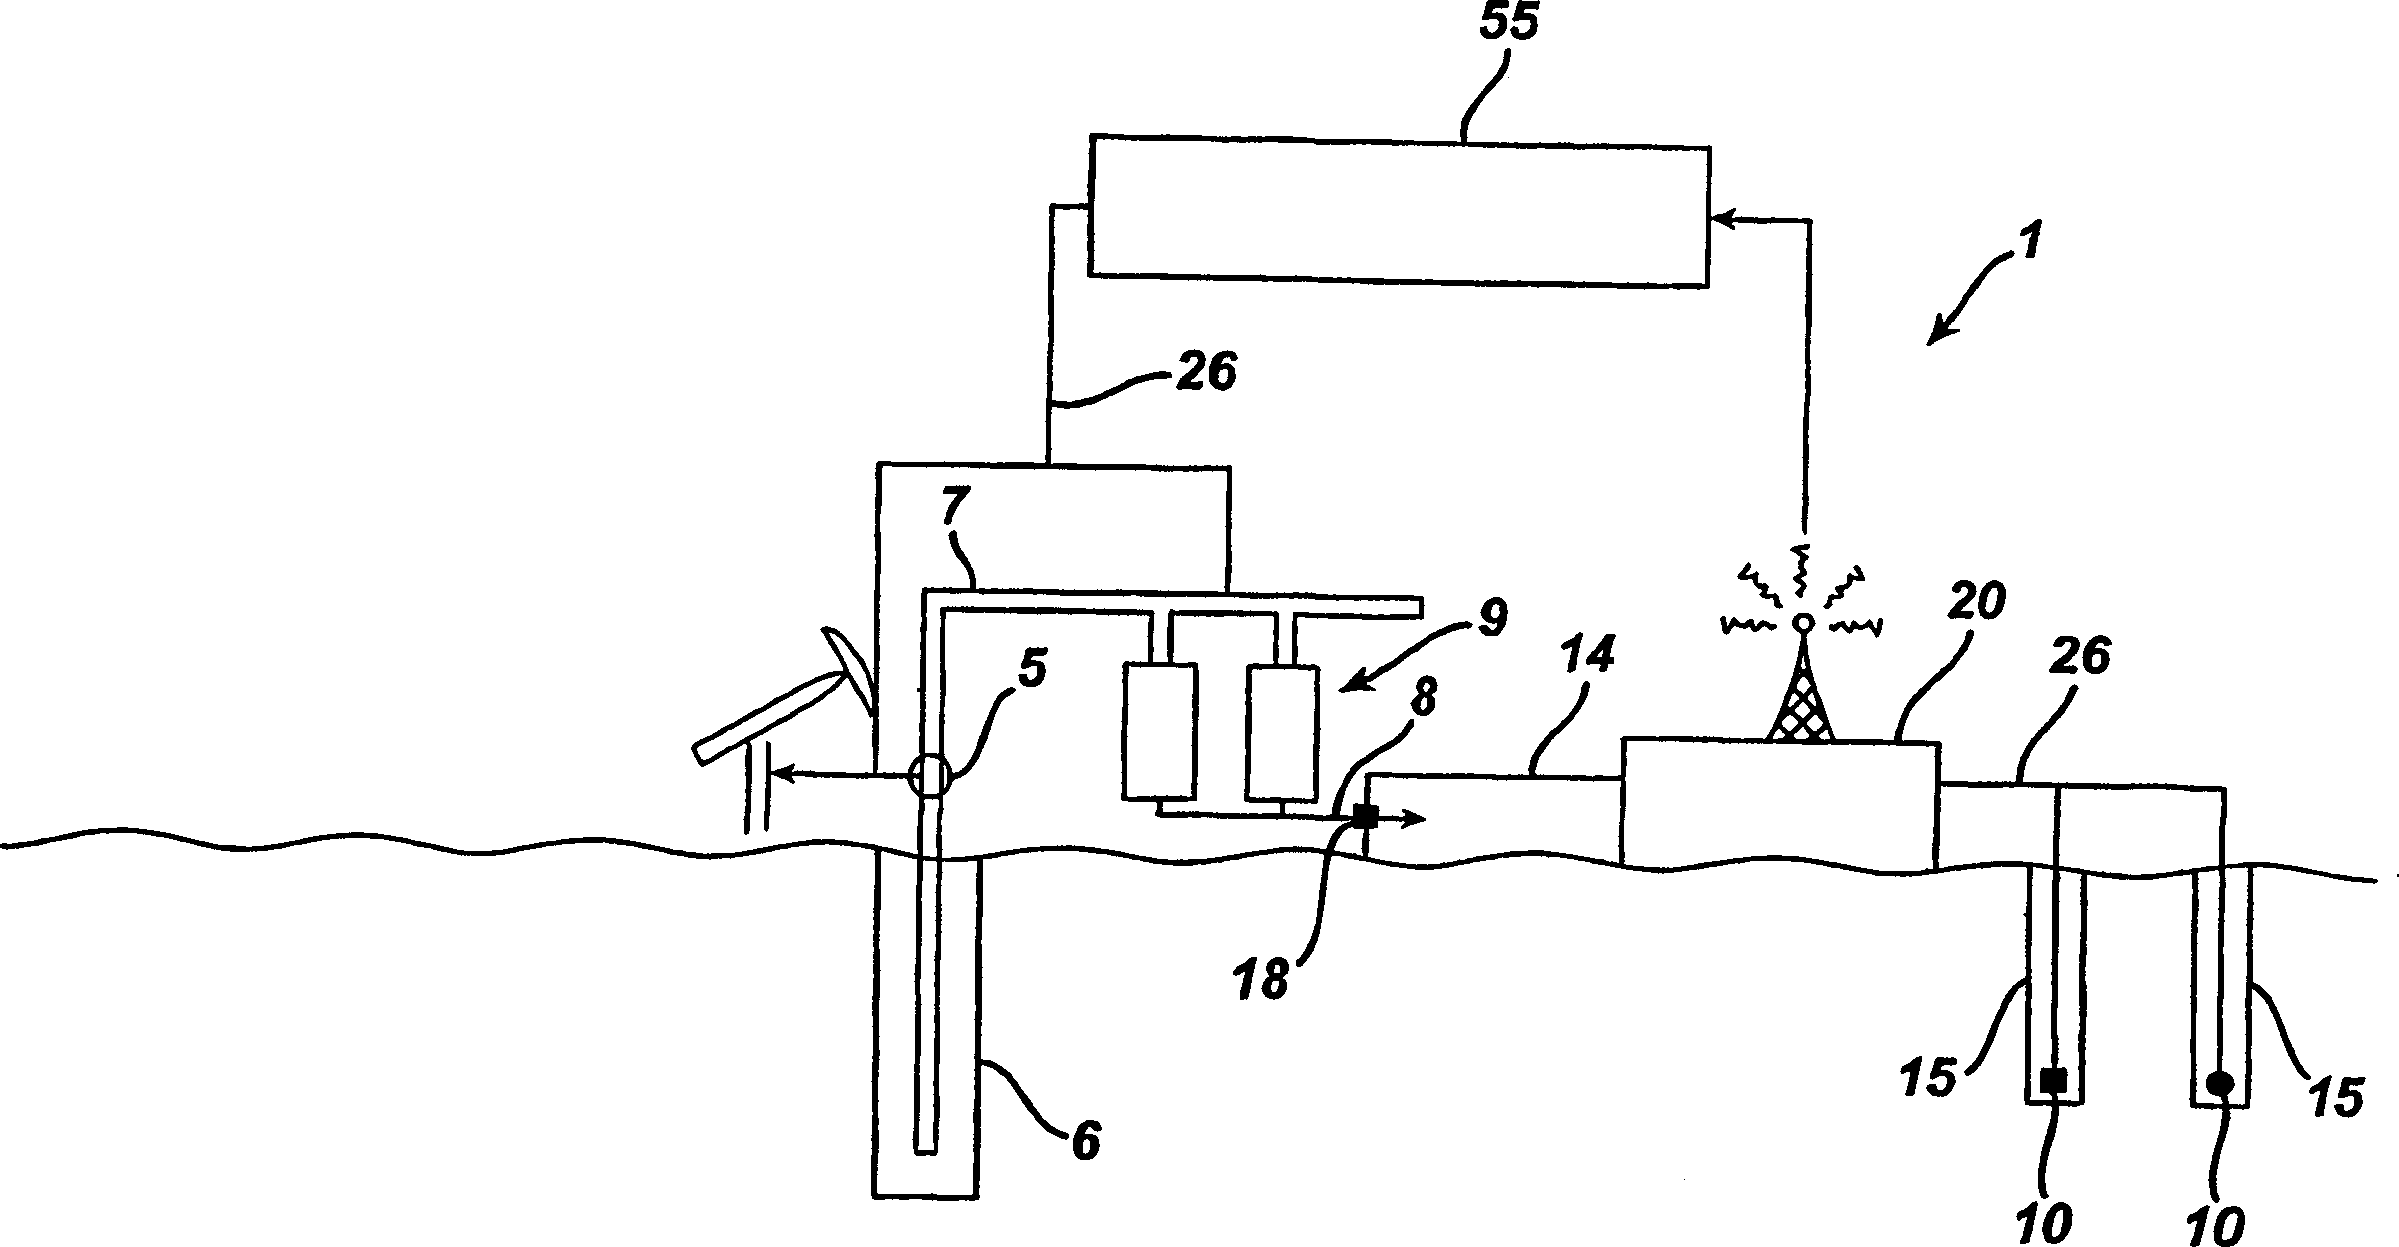 Method and system to remotely monitor groundwater treatment